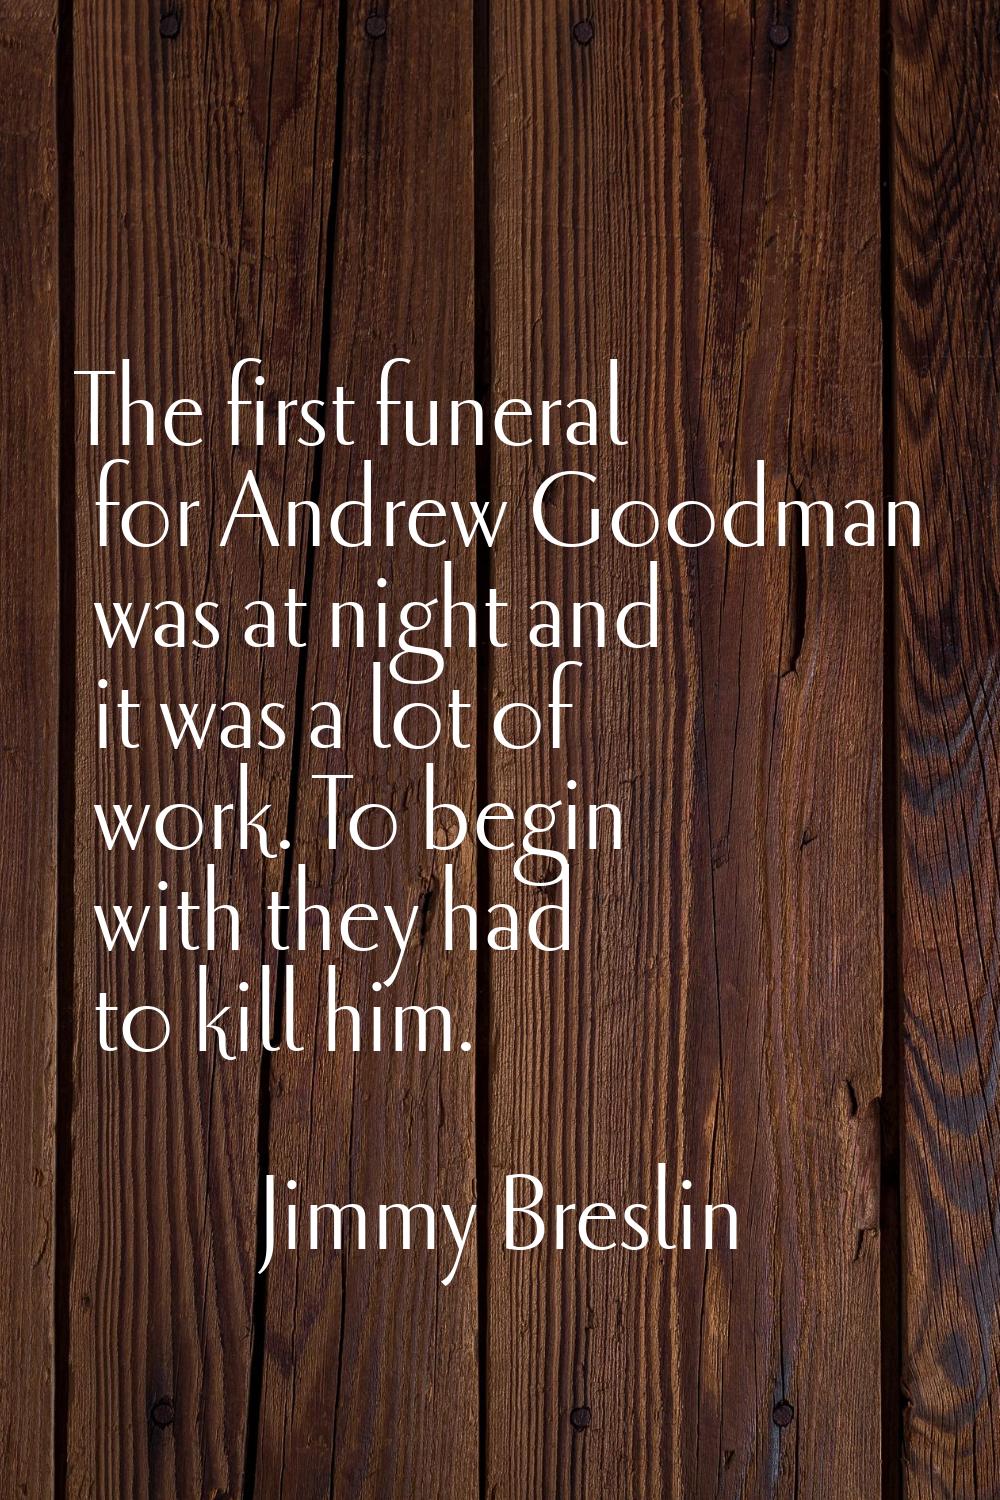 The first funeral for Andrew Goodman was at night and it was a lot of work. To begin with they had 